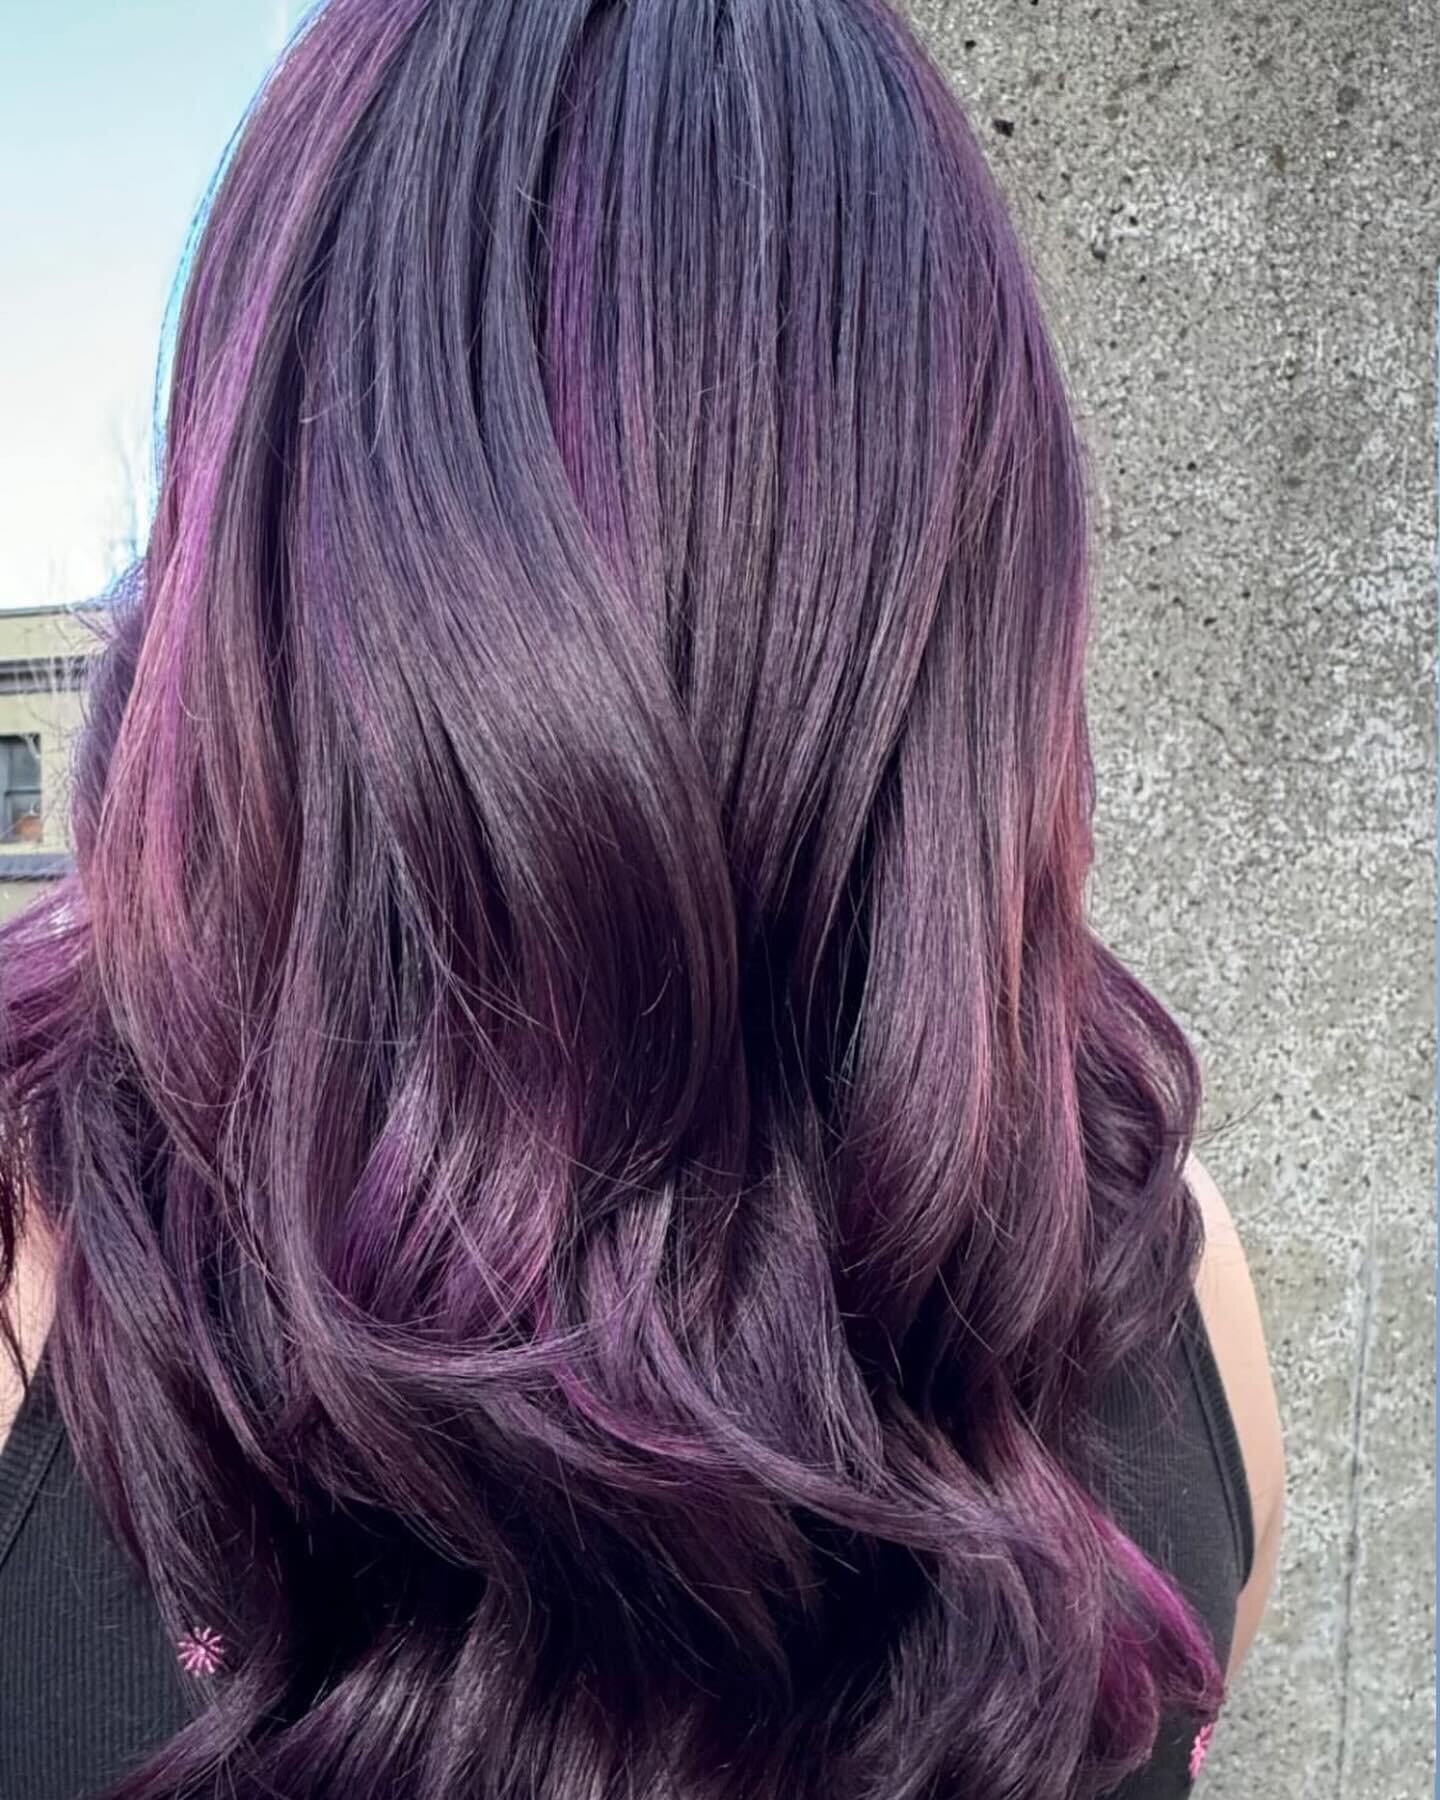 Needing some color in your life? Alison is the stylist for you 🌈 @bleotchh 

She has openings this month for cuts and colors! To get on her books schedule and appointment online through vagaro or by giving us a call:

503-223-7331
www.vagaro.com/77s